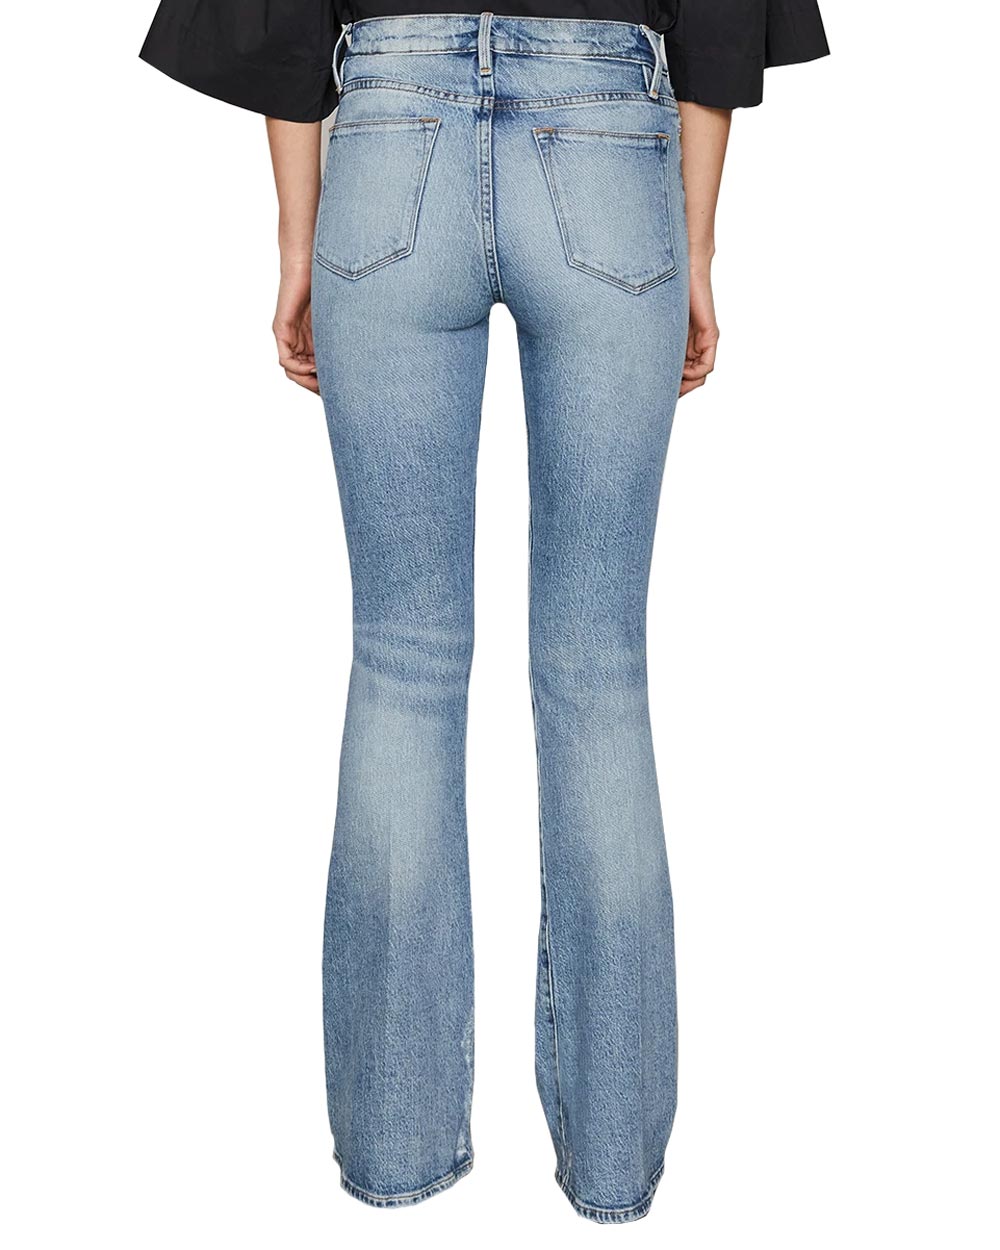 Le High Flare Jean in Crystal Shore Rips